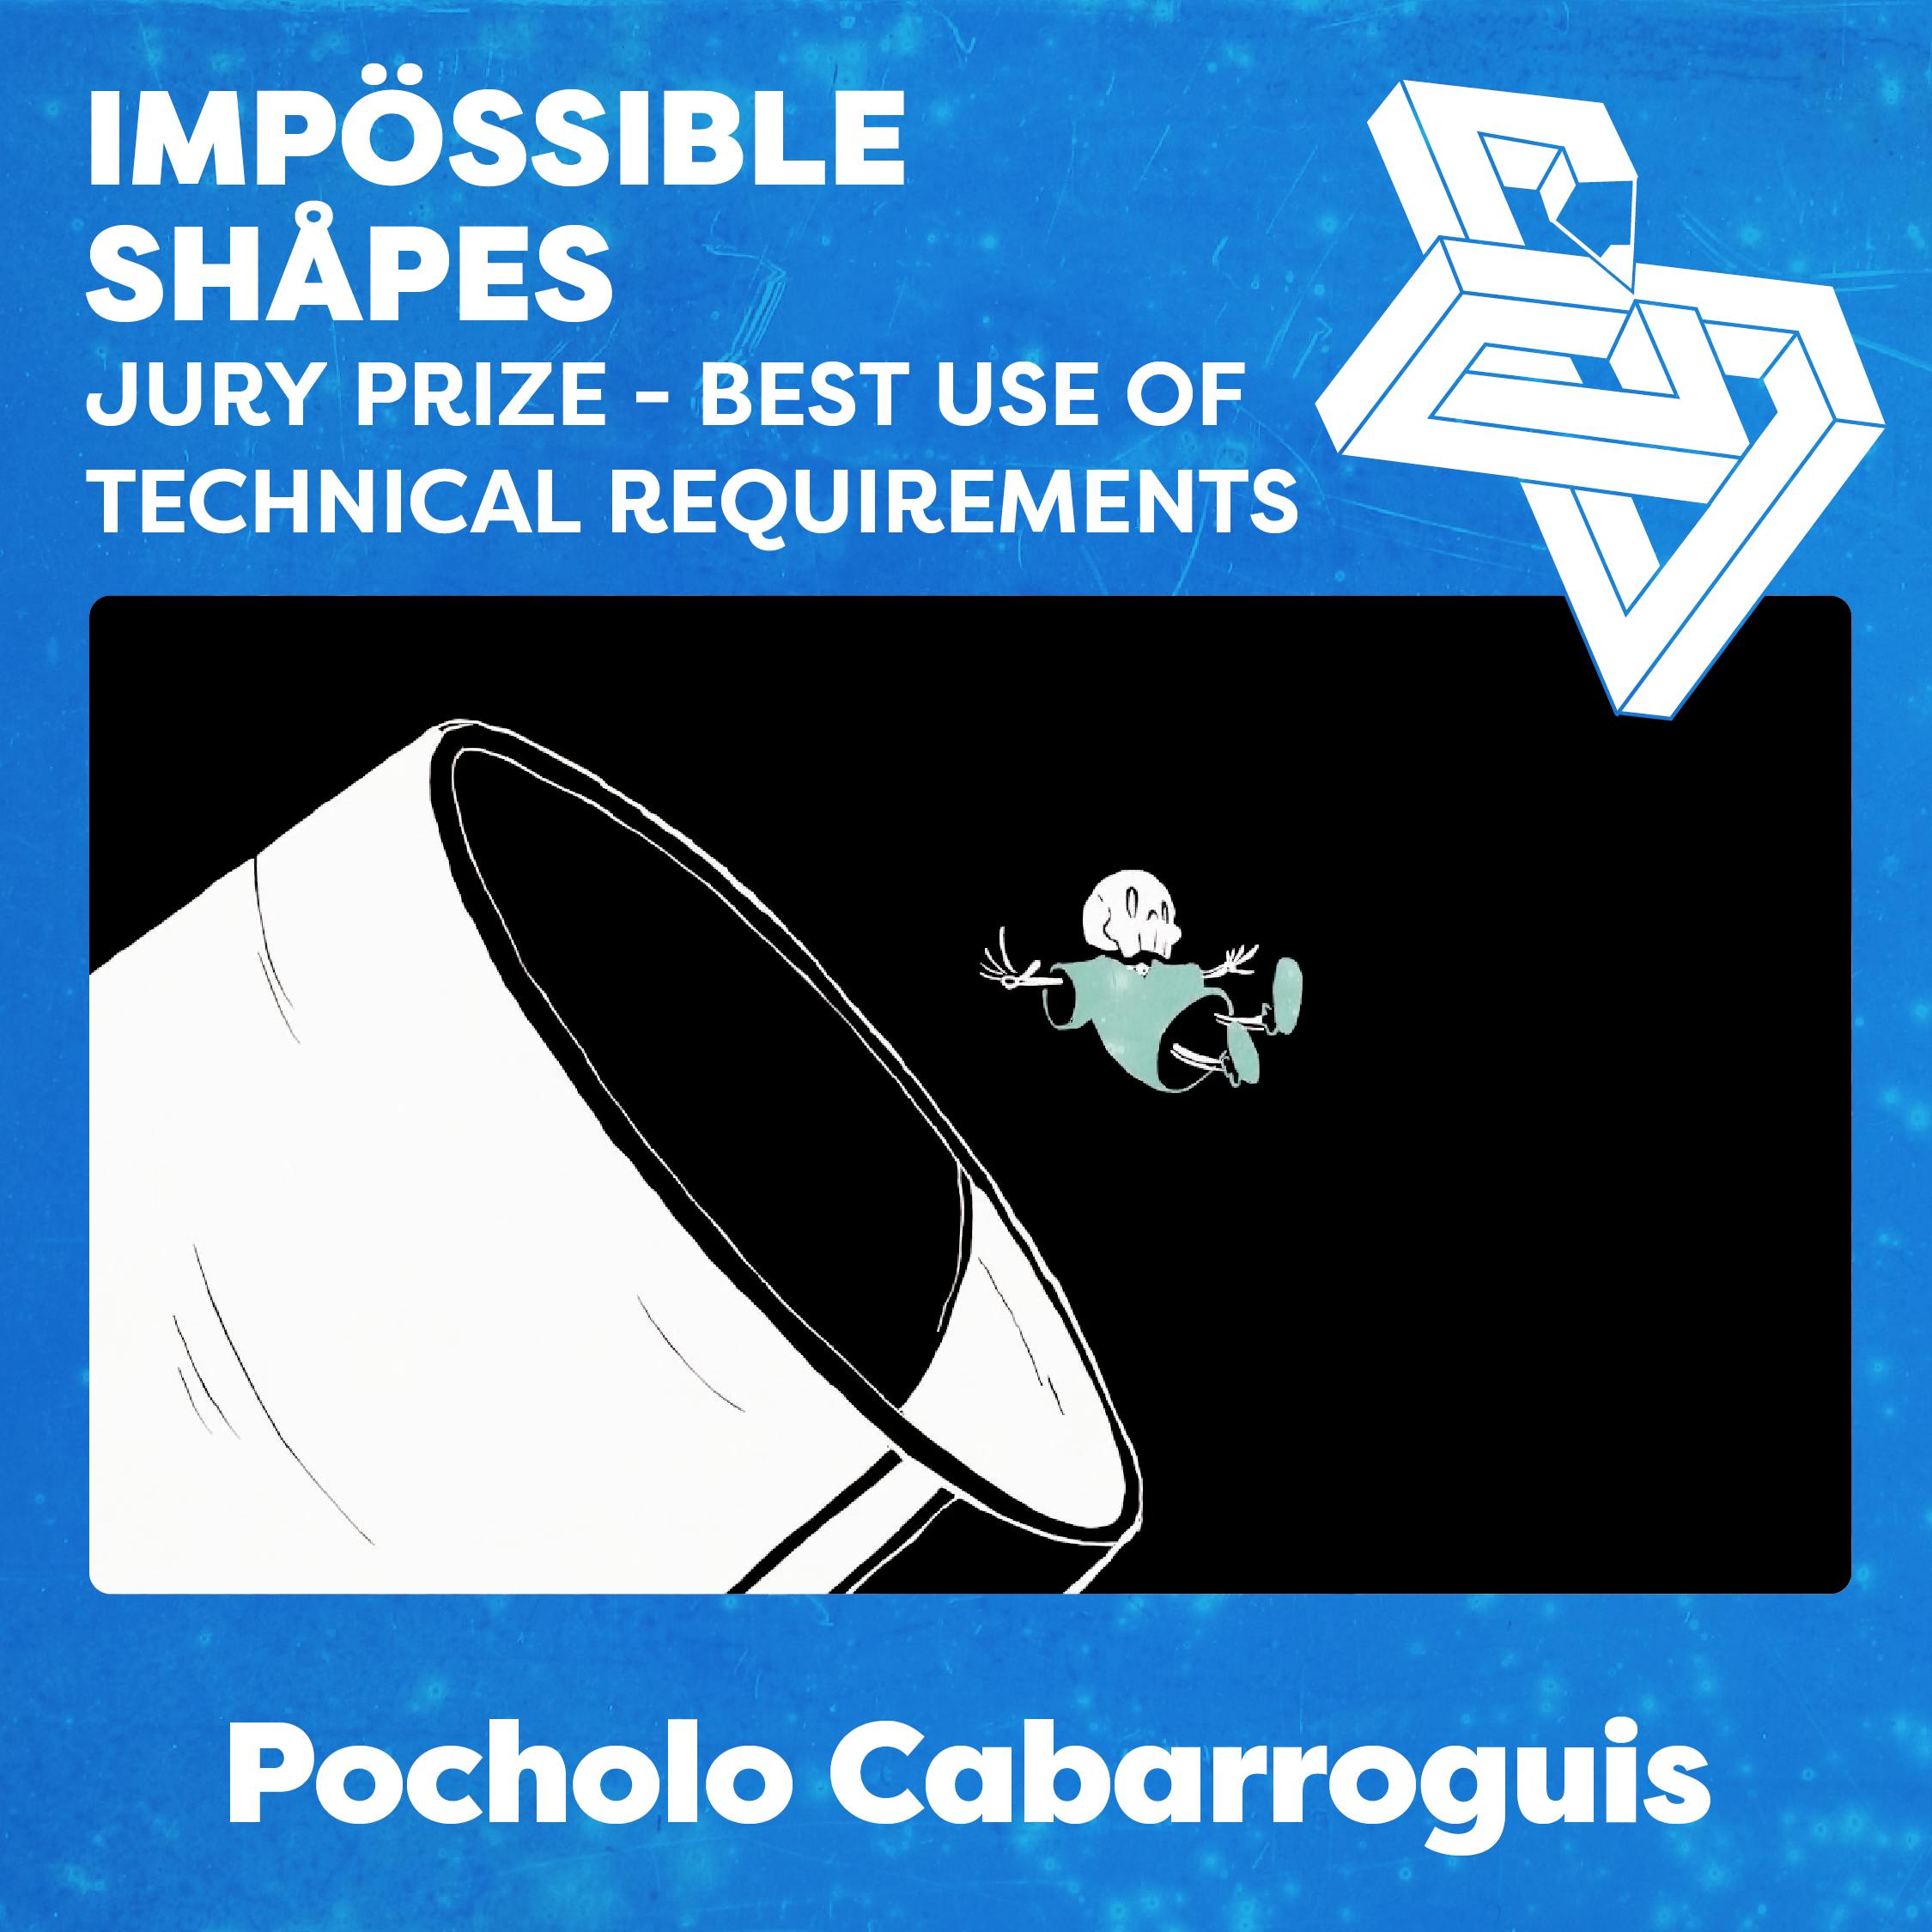 slide for the winner of Impossible Shapes Jury Prize: Best use of Technical Requirements
Pocholo Cabarroguis